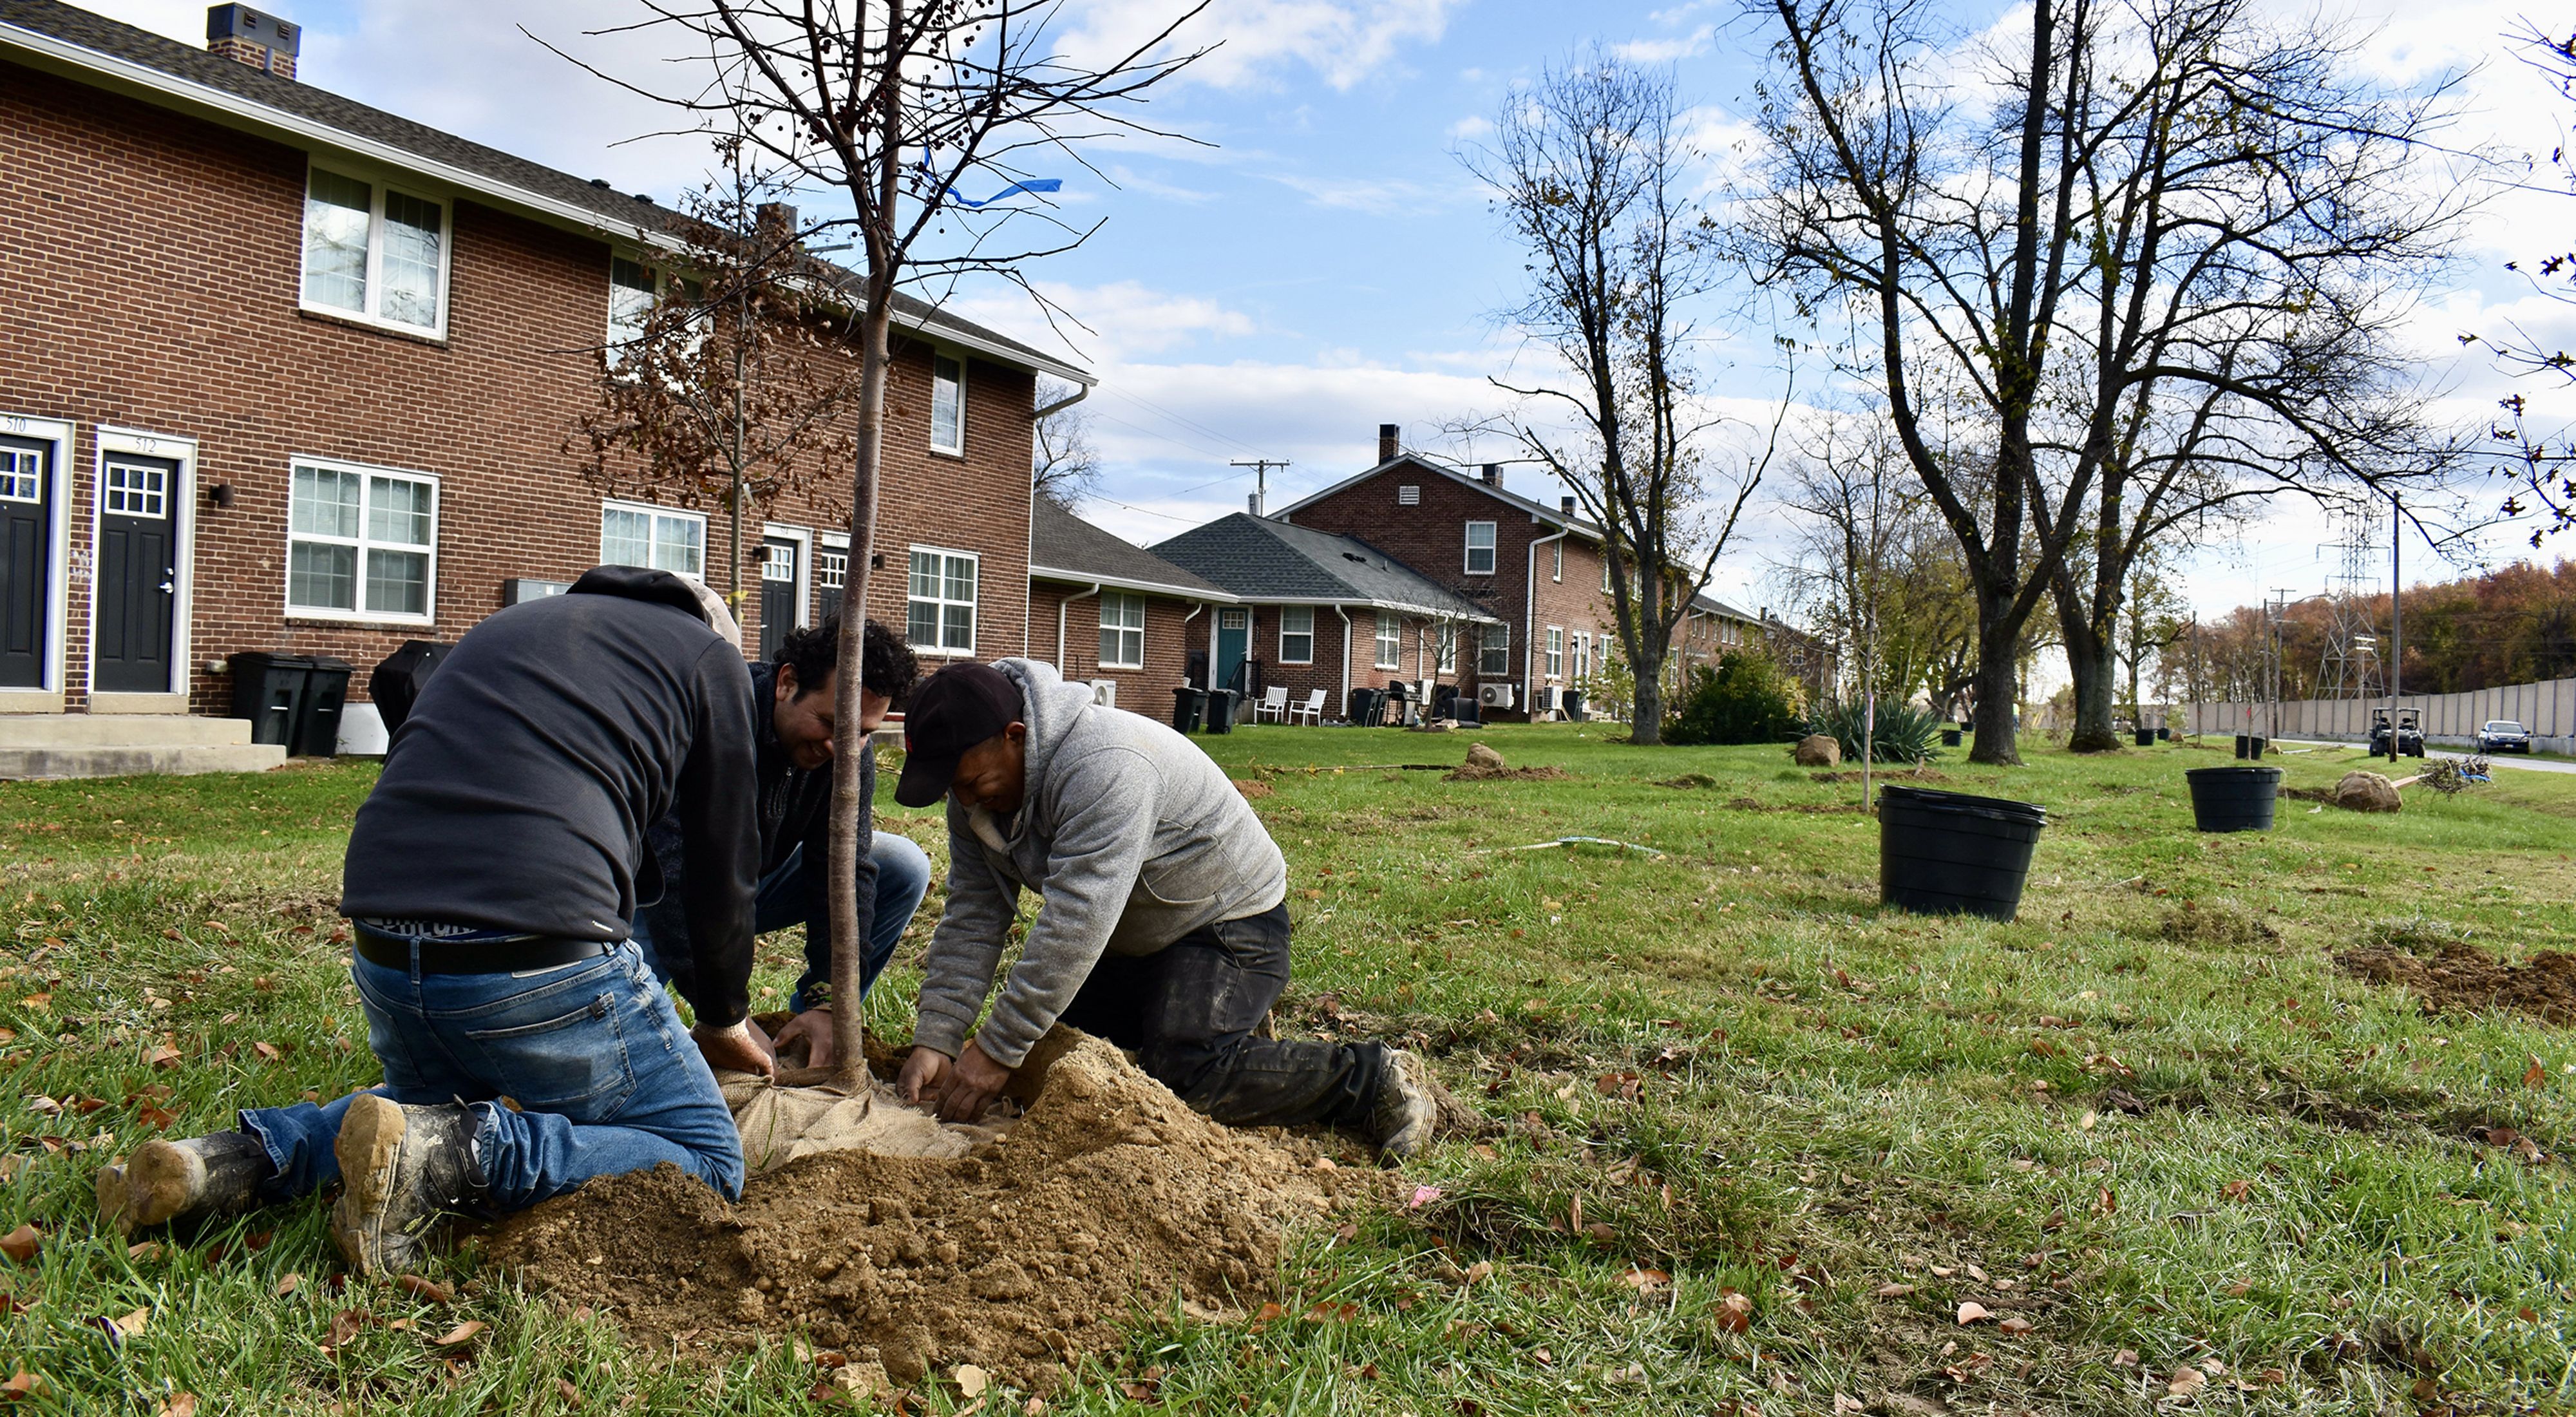 Three men plant a large tree in a narrow green space at the edge of a residential community.